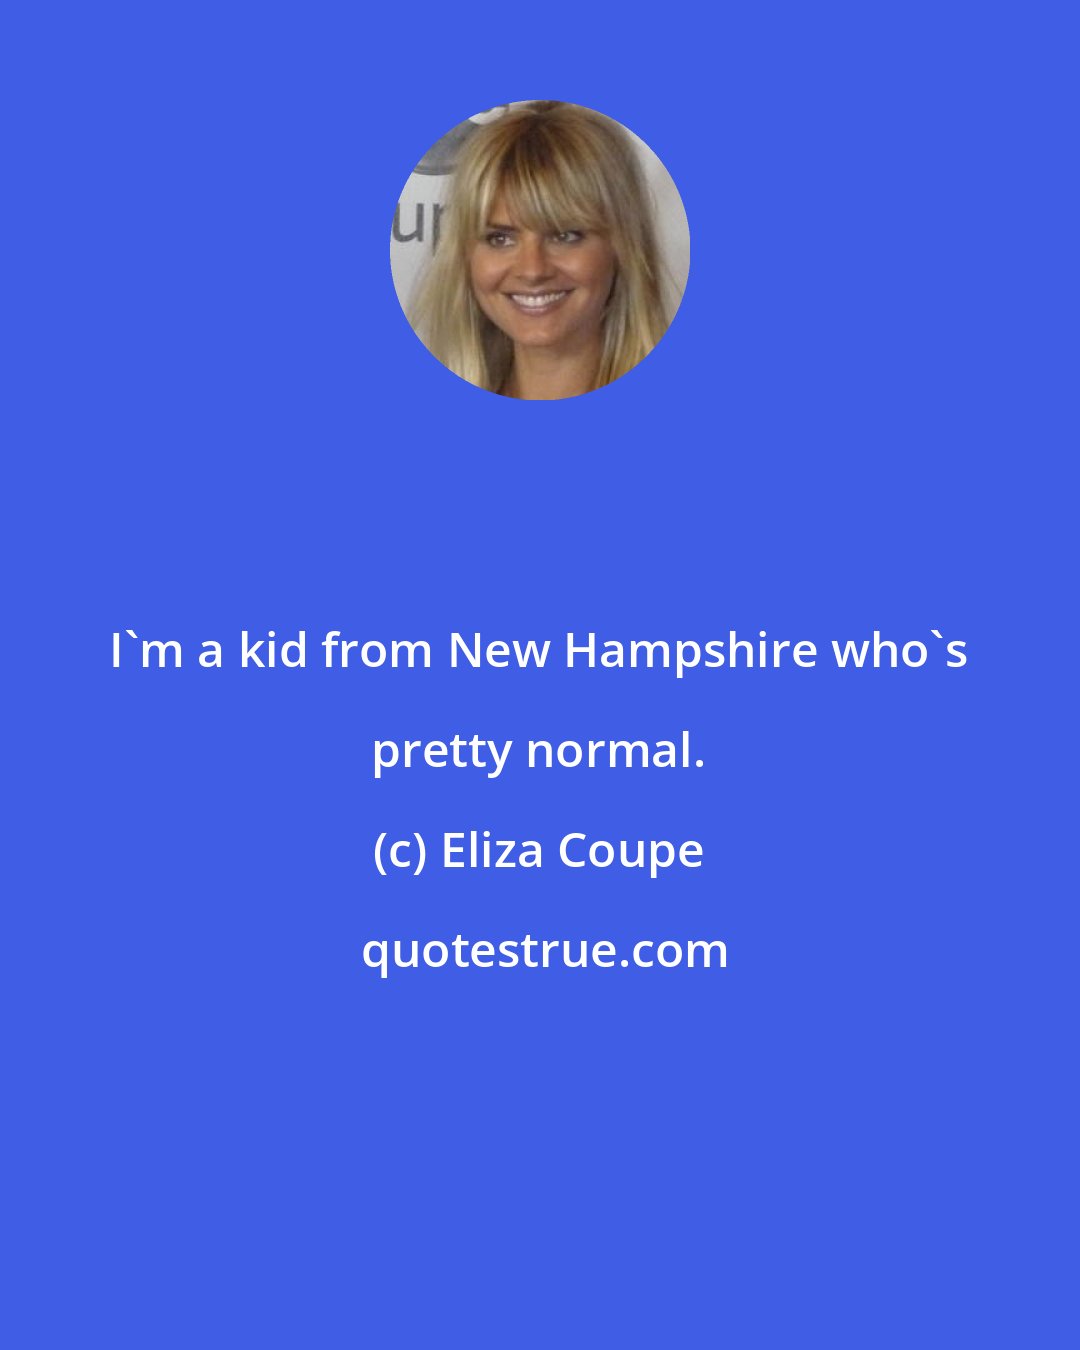 Eliza Coupe: I'm a kid from New Hampshire who's pretty normal.